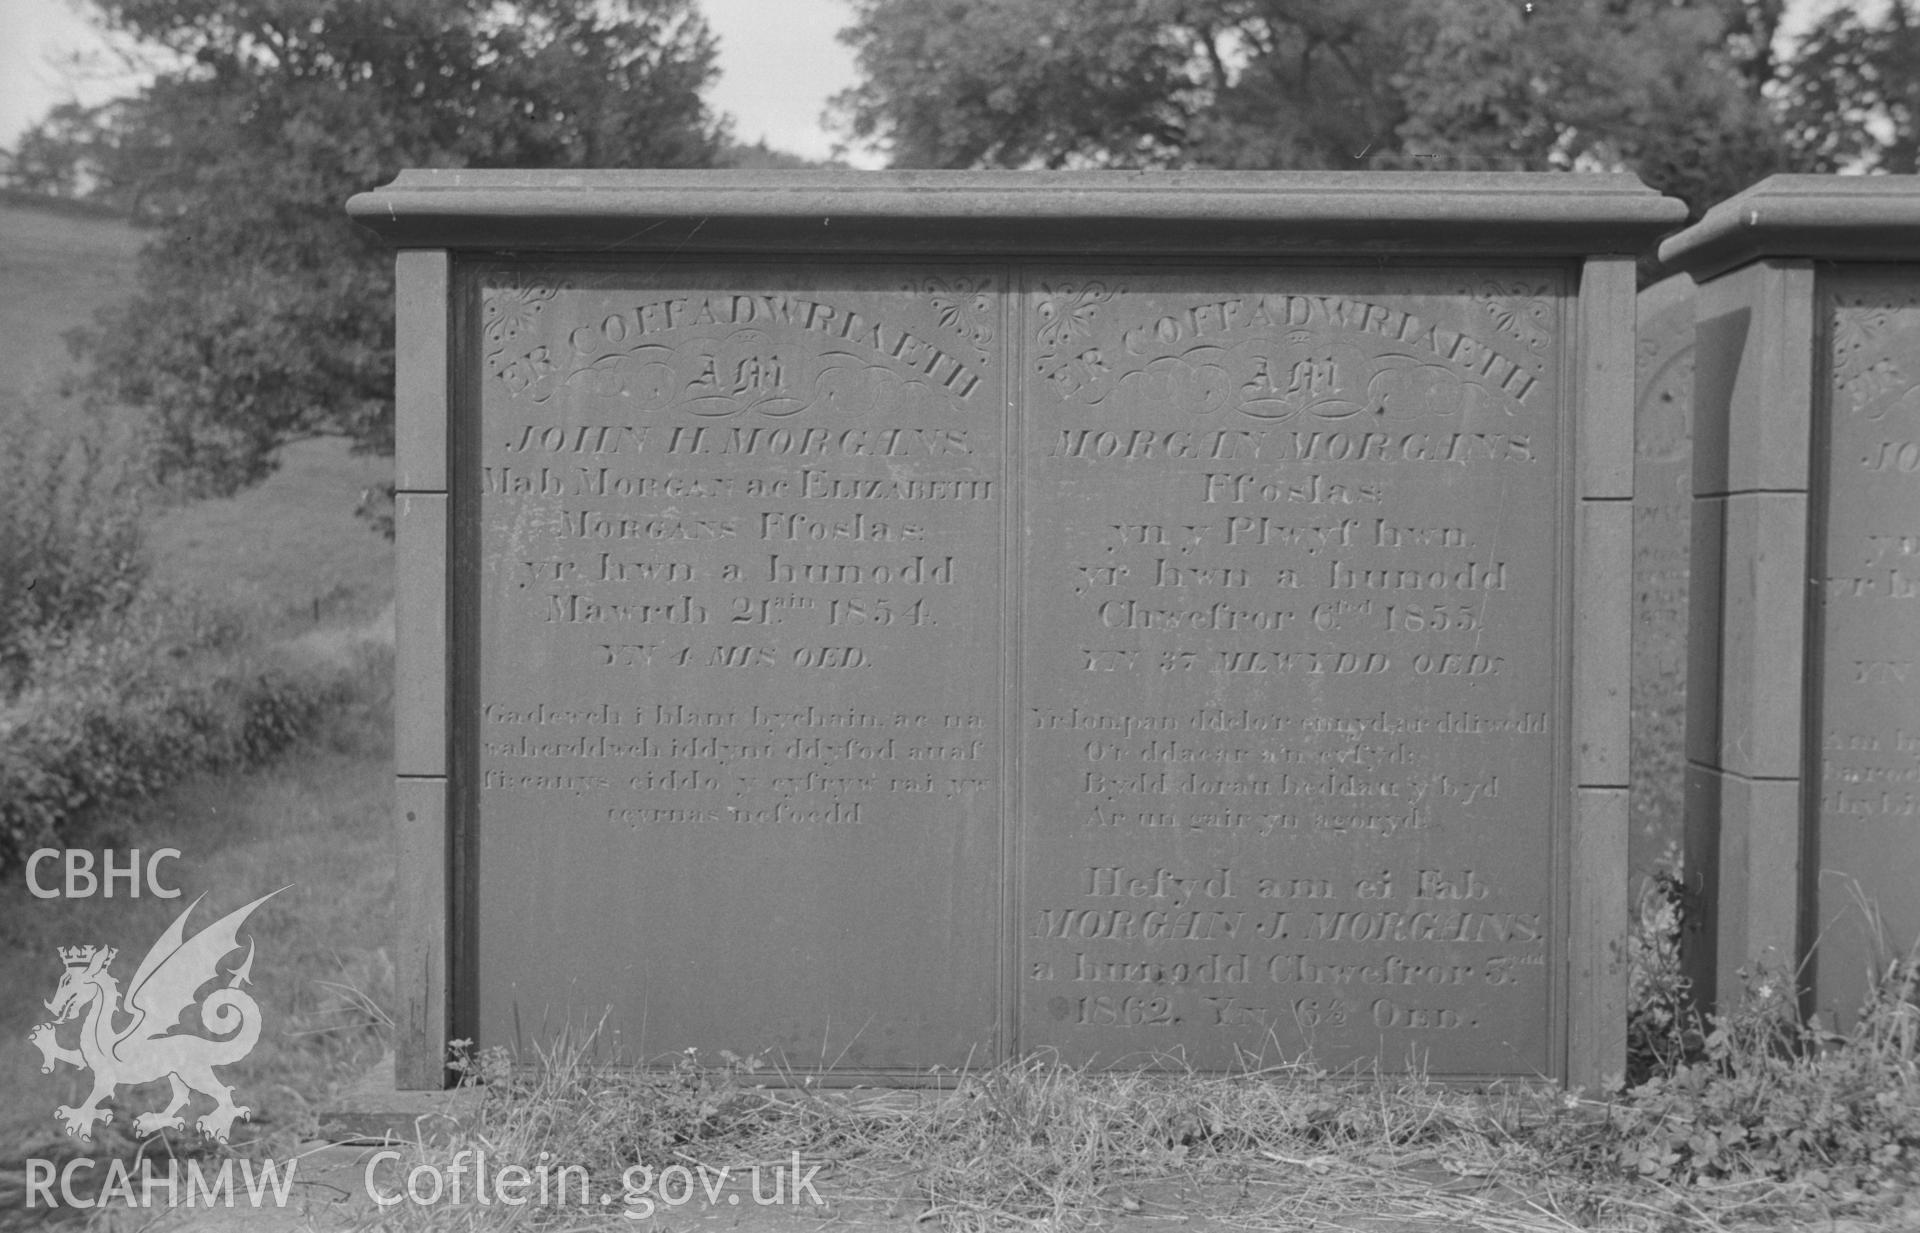 Digital copy of a black and white negative showing gravestone in memory of the Morgans family at St. Non's Church, Llanerchaeron. Photographed by Arthur O. Chater in September 1966.